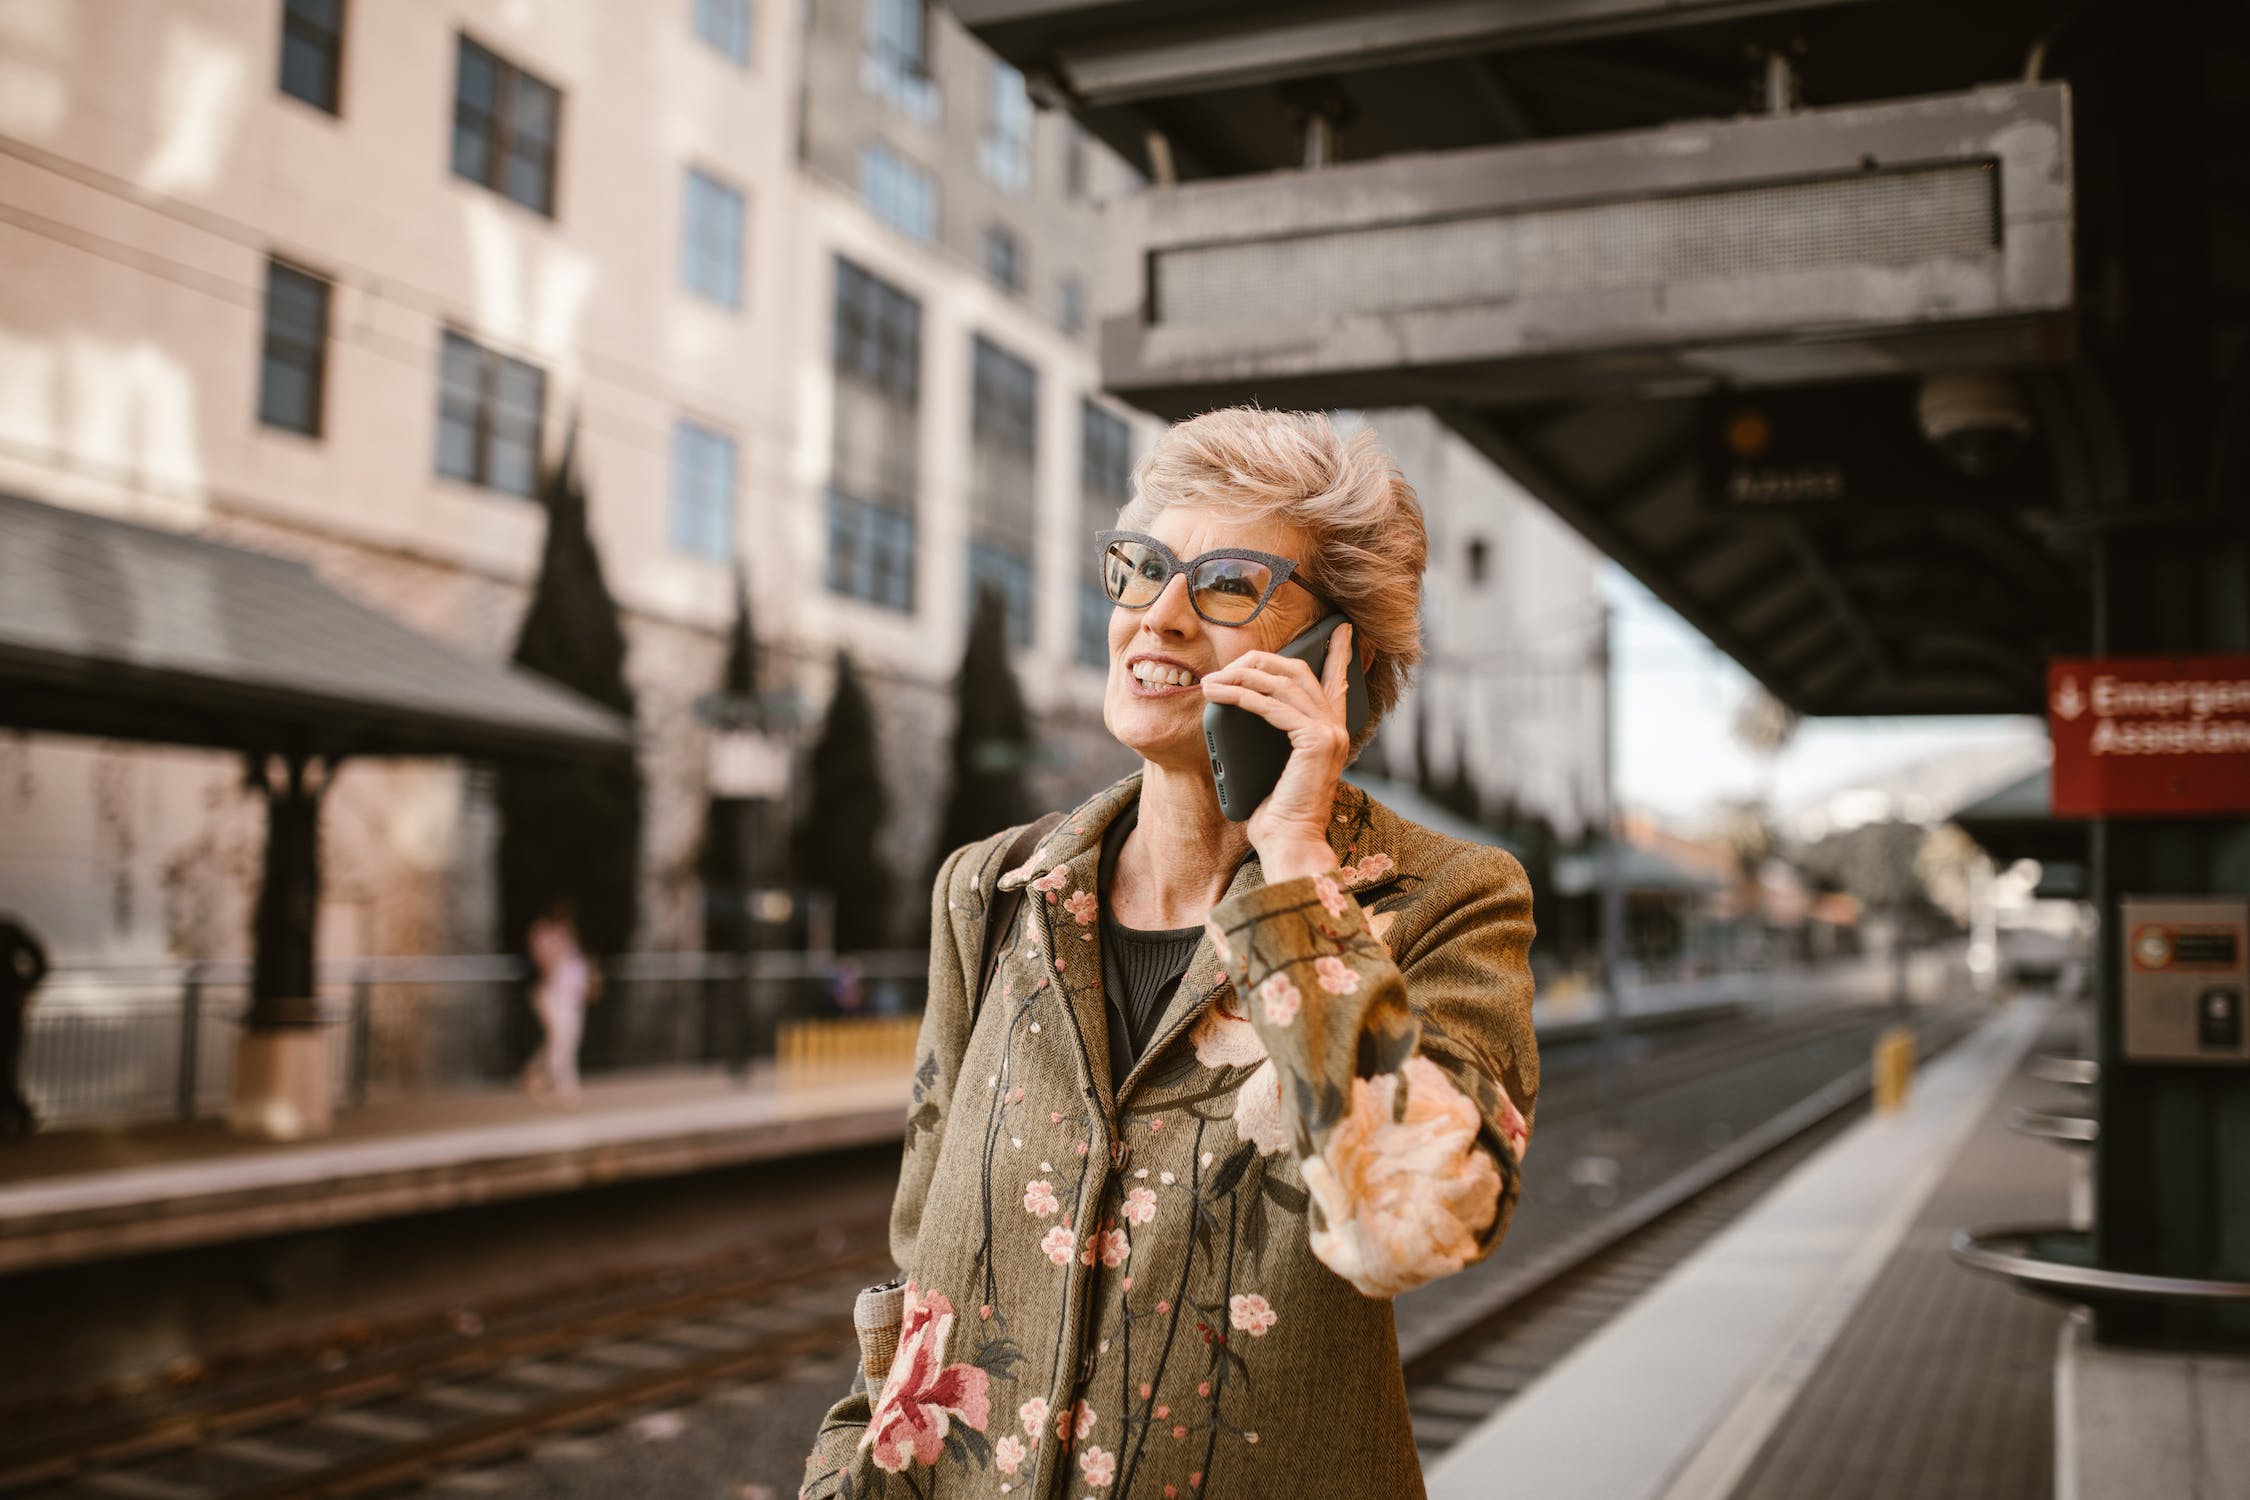 A woman with blonde hair, wearing a flowered jacket, smiles as she talks on the phone while walking along train tracks at a train station.